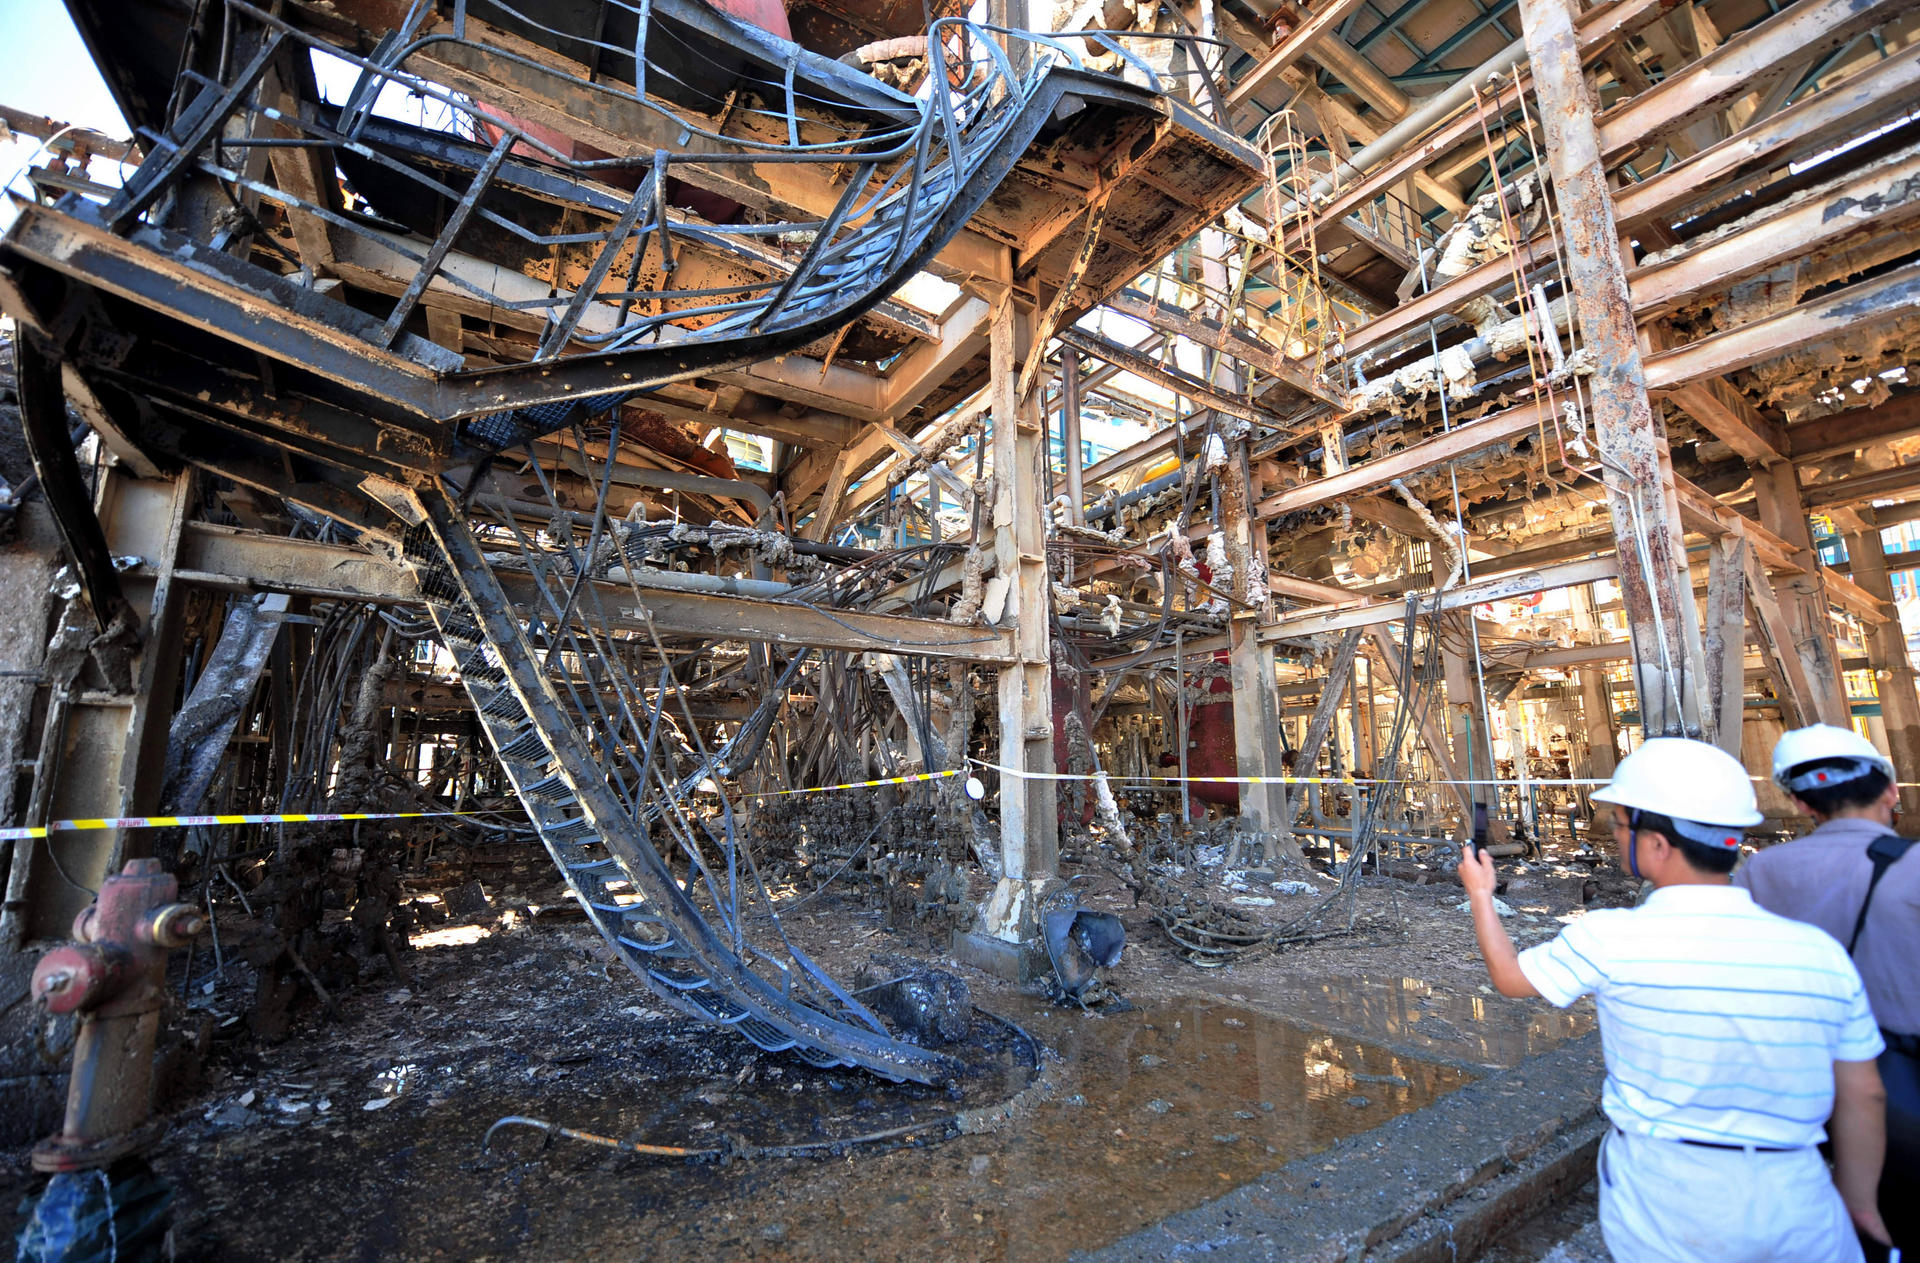 The fire was put out quickly, but wreaked havoc inside. Photo: SCMP